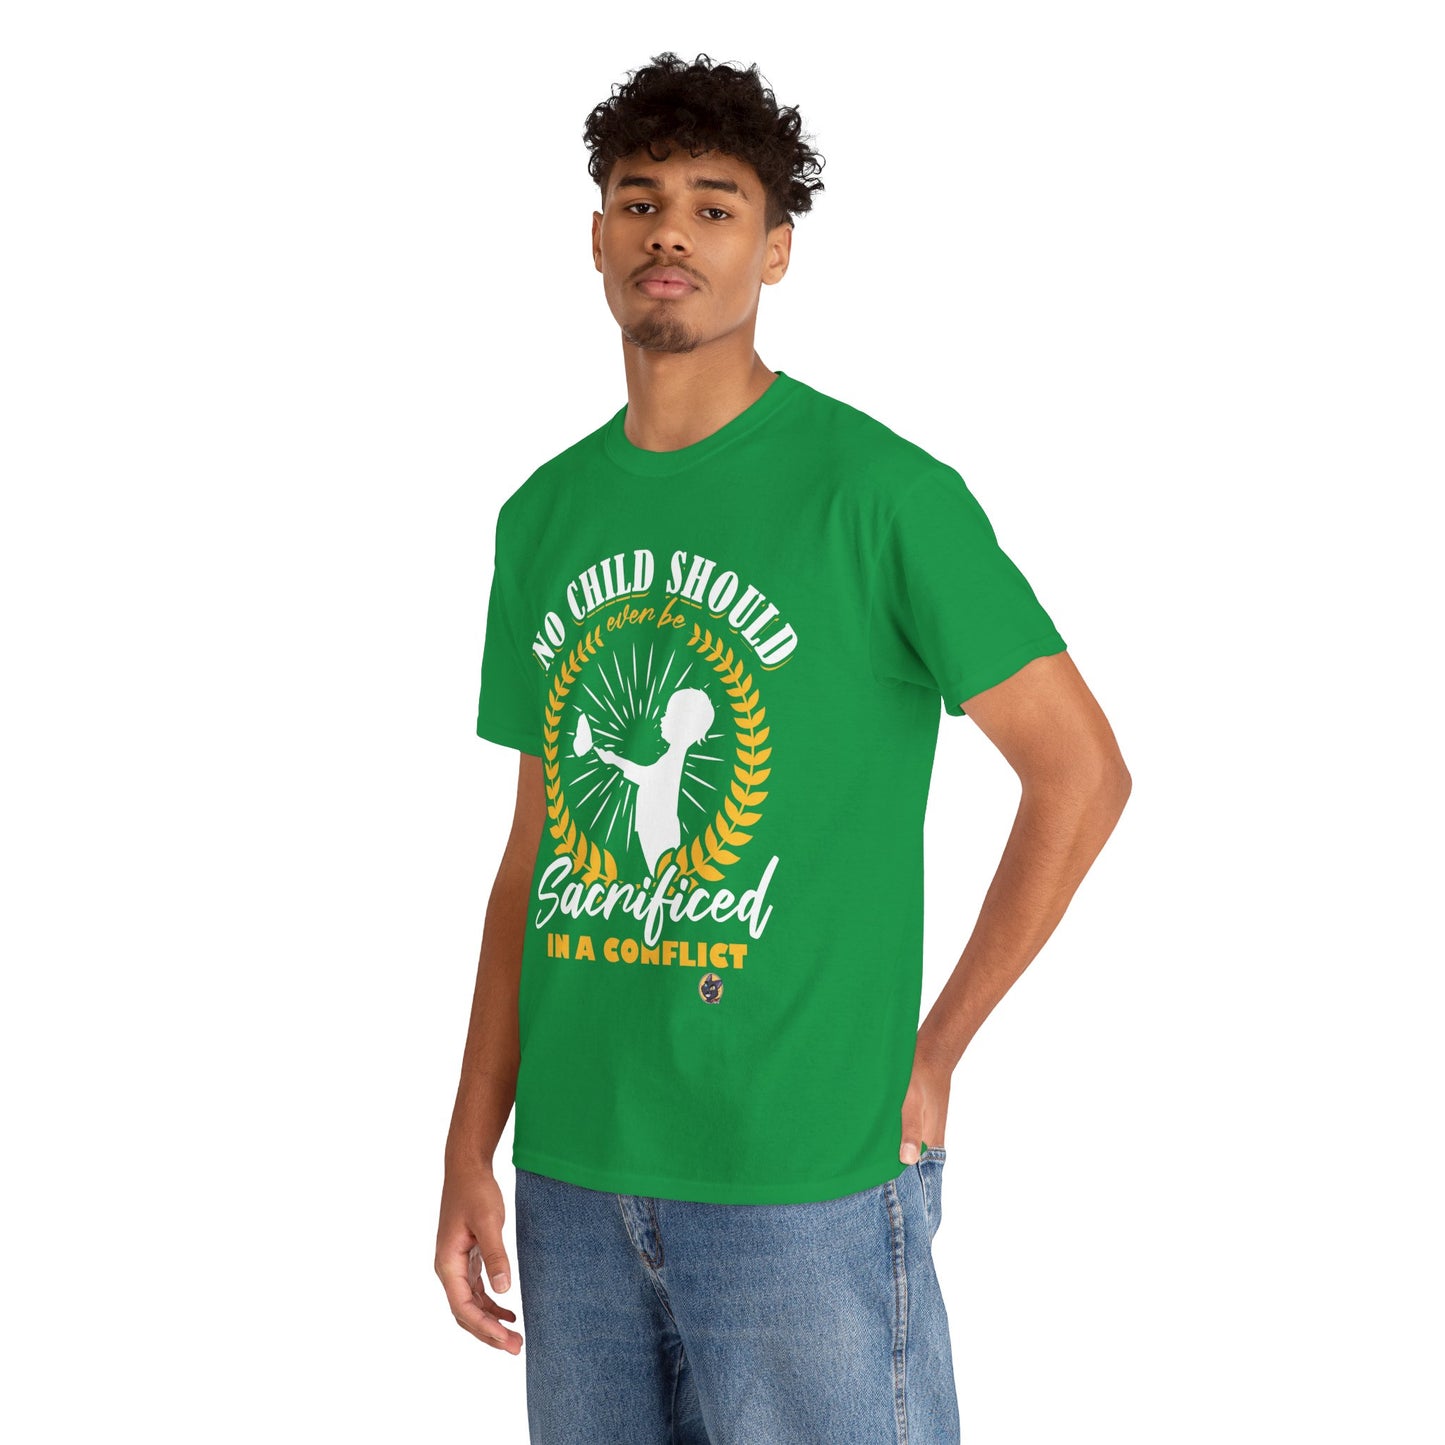 The Freedom Fighter T-Shirt: No child should even be sacrificed in a conflict Jack